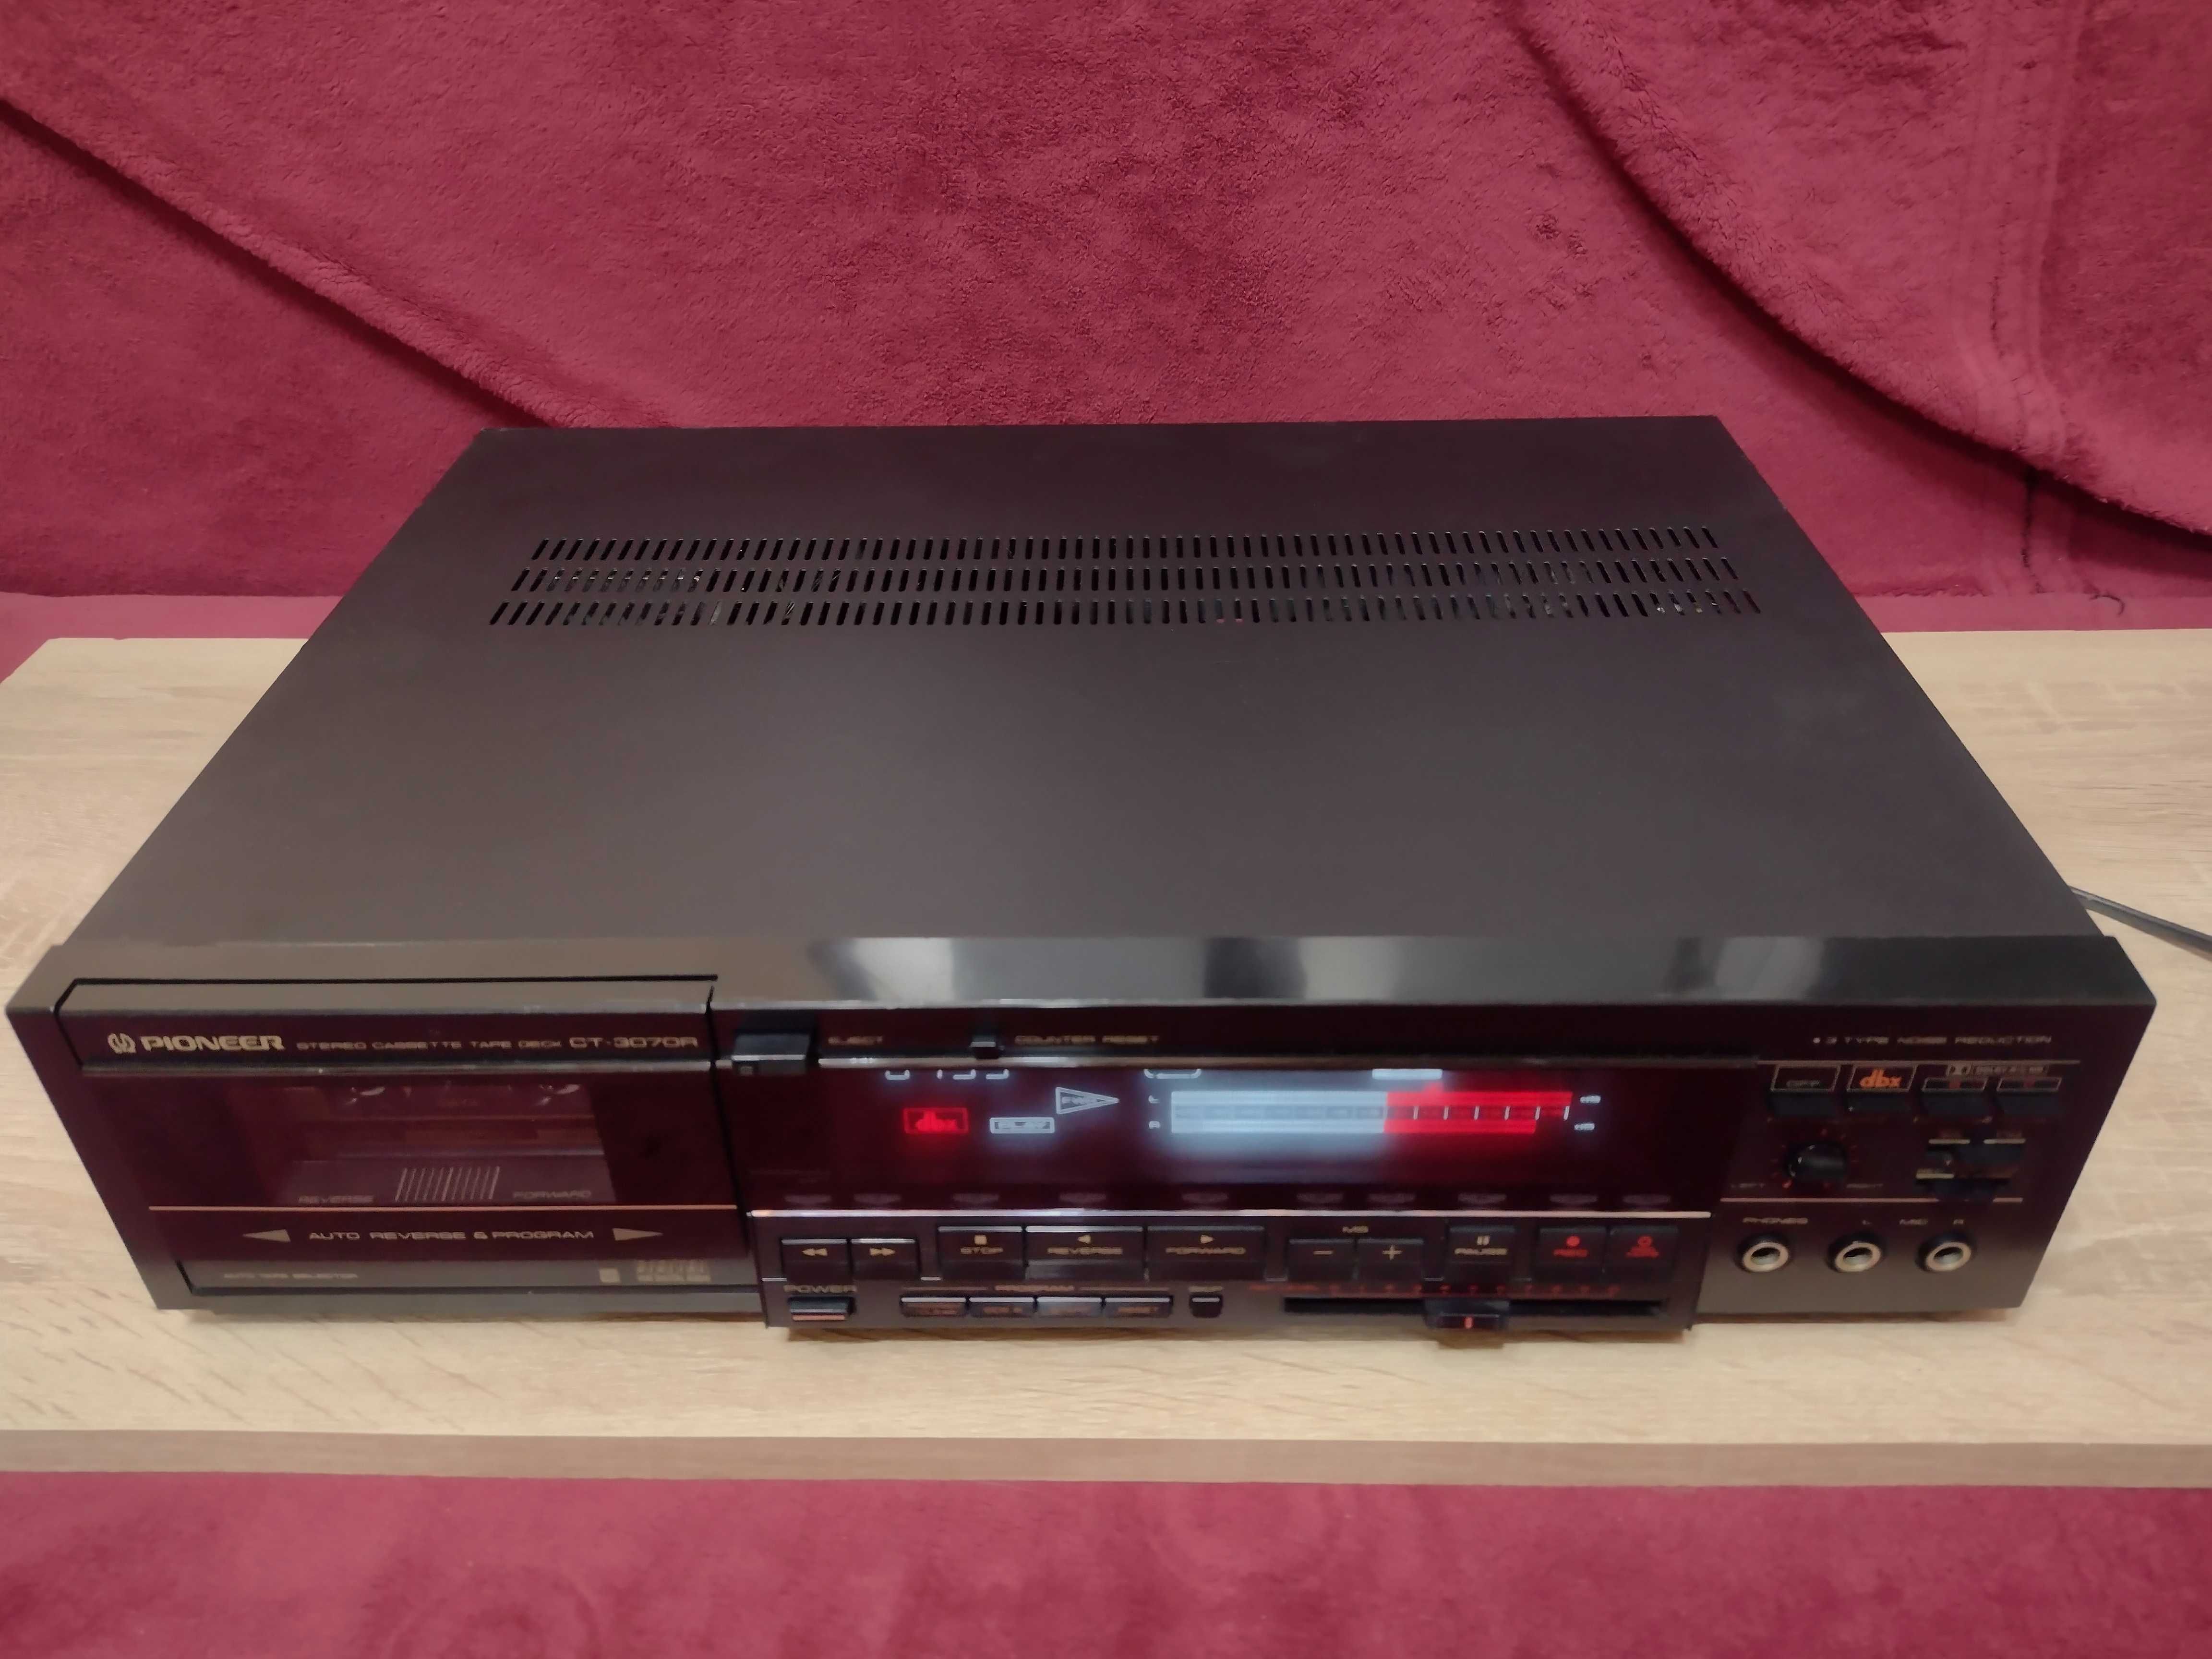 Pioneer CT-3070R Stereo Cassette Deck, Dolby BC, DBX